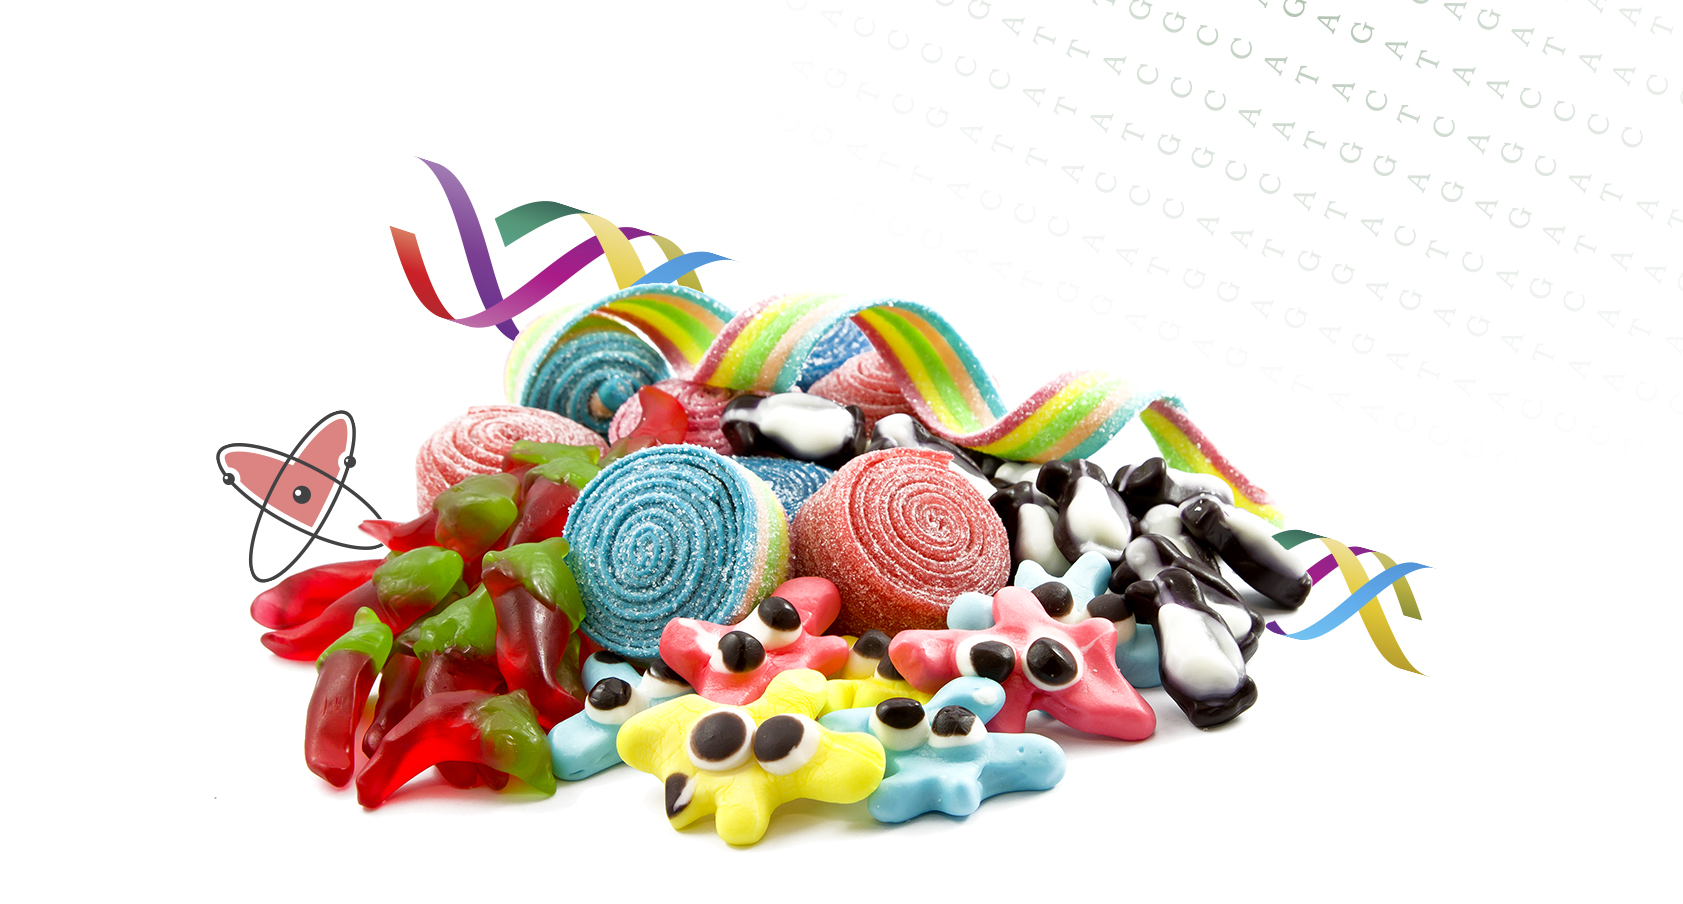 Sweet Science – 6 Top-Selling Types of Gummies (and the science behind them)